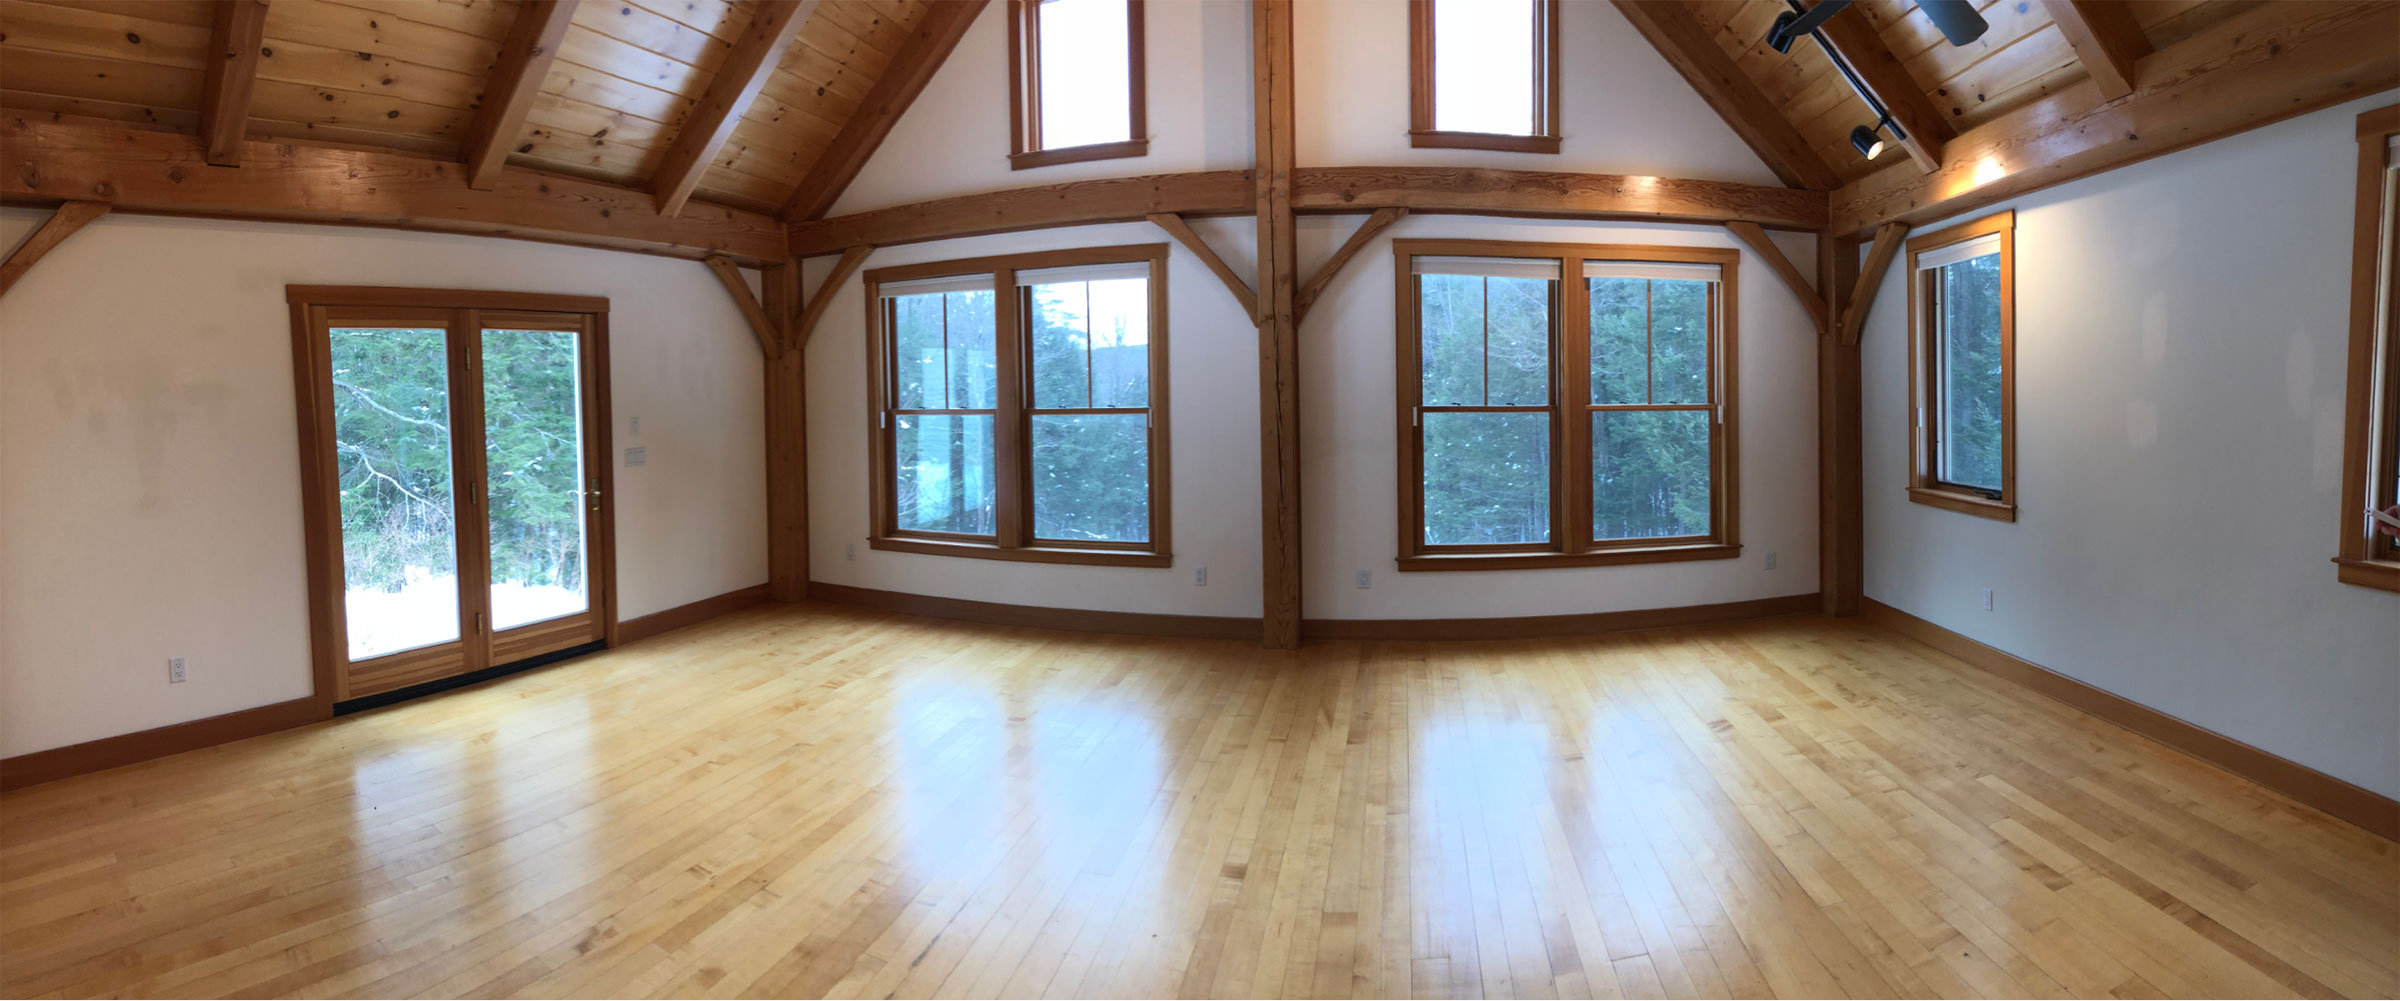 empty room in post and beam house with lots of windows